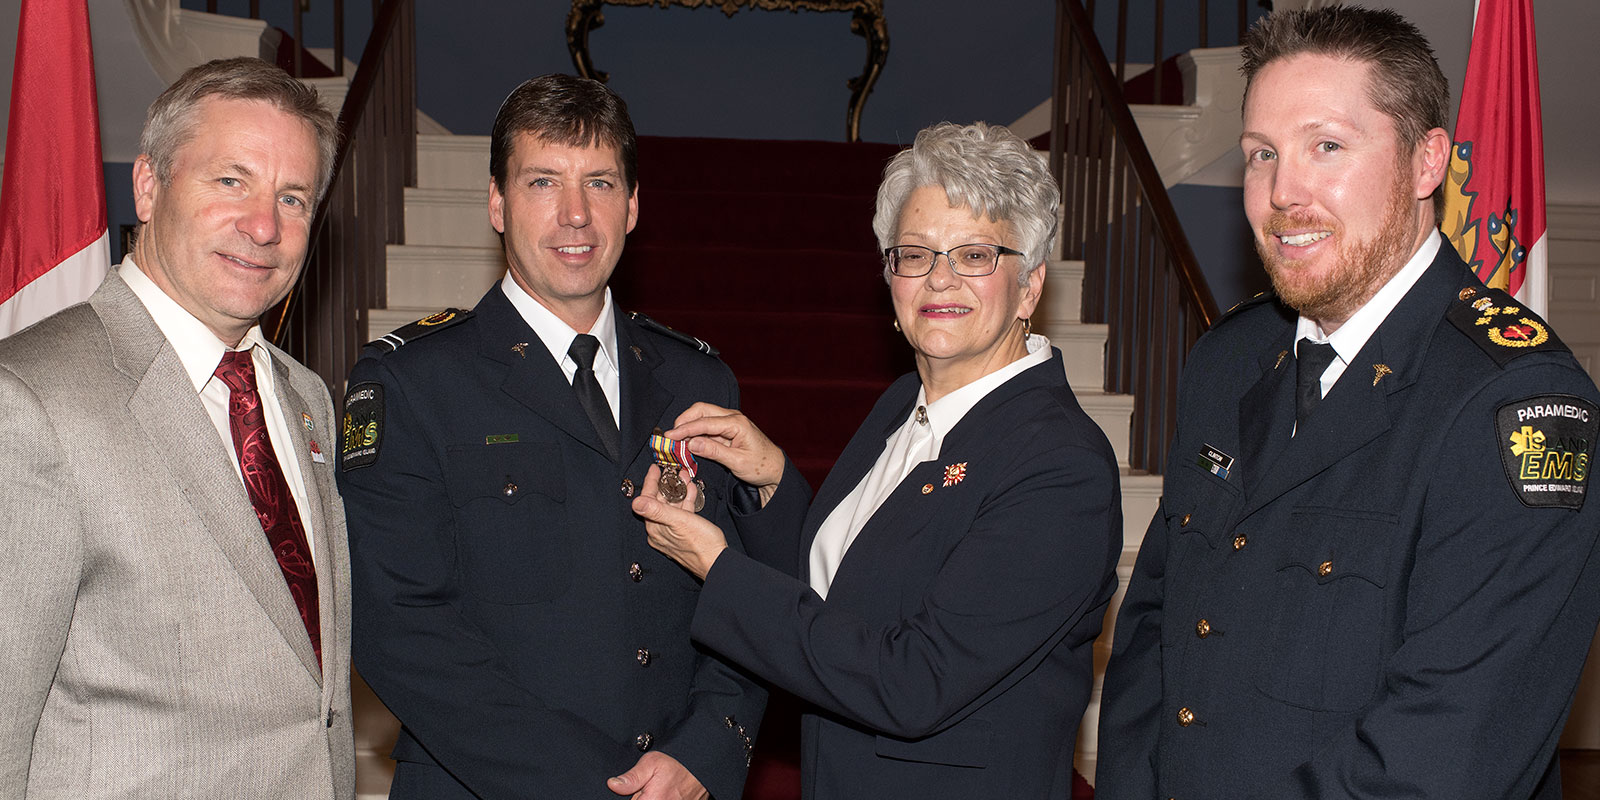 Paramedic Exemplary Service medals